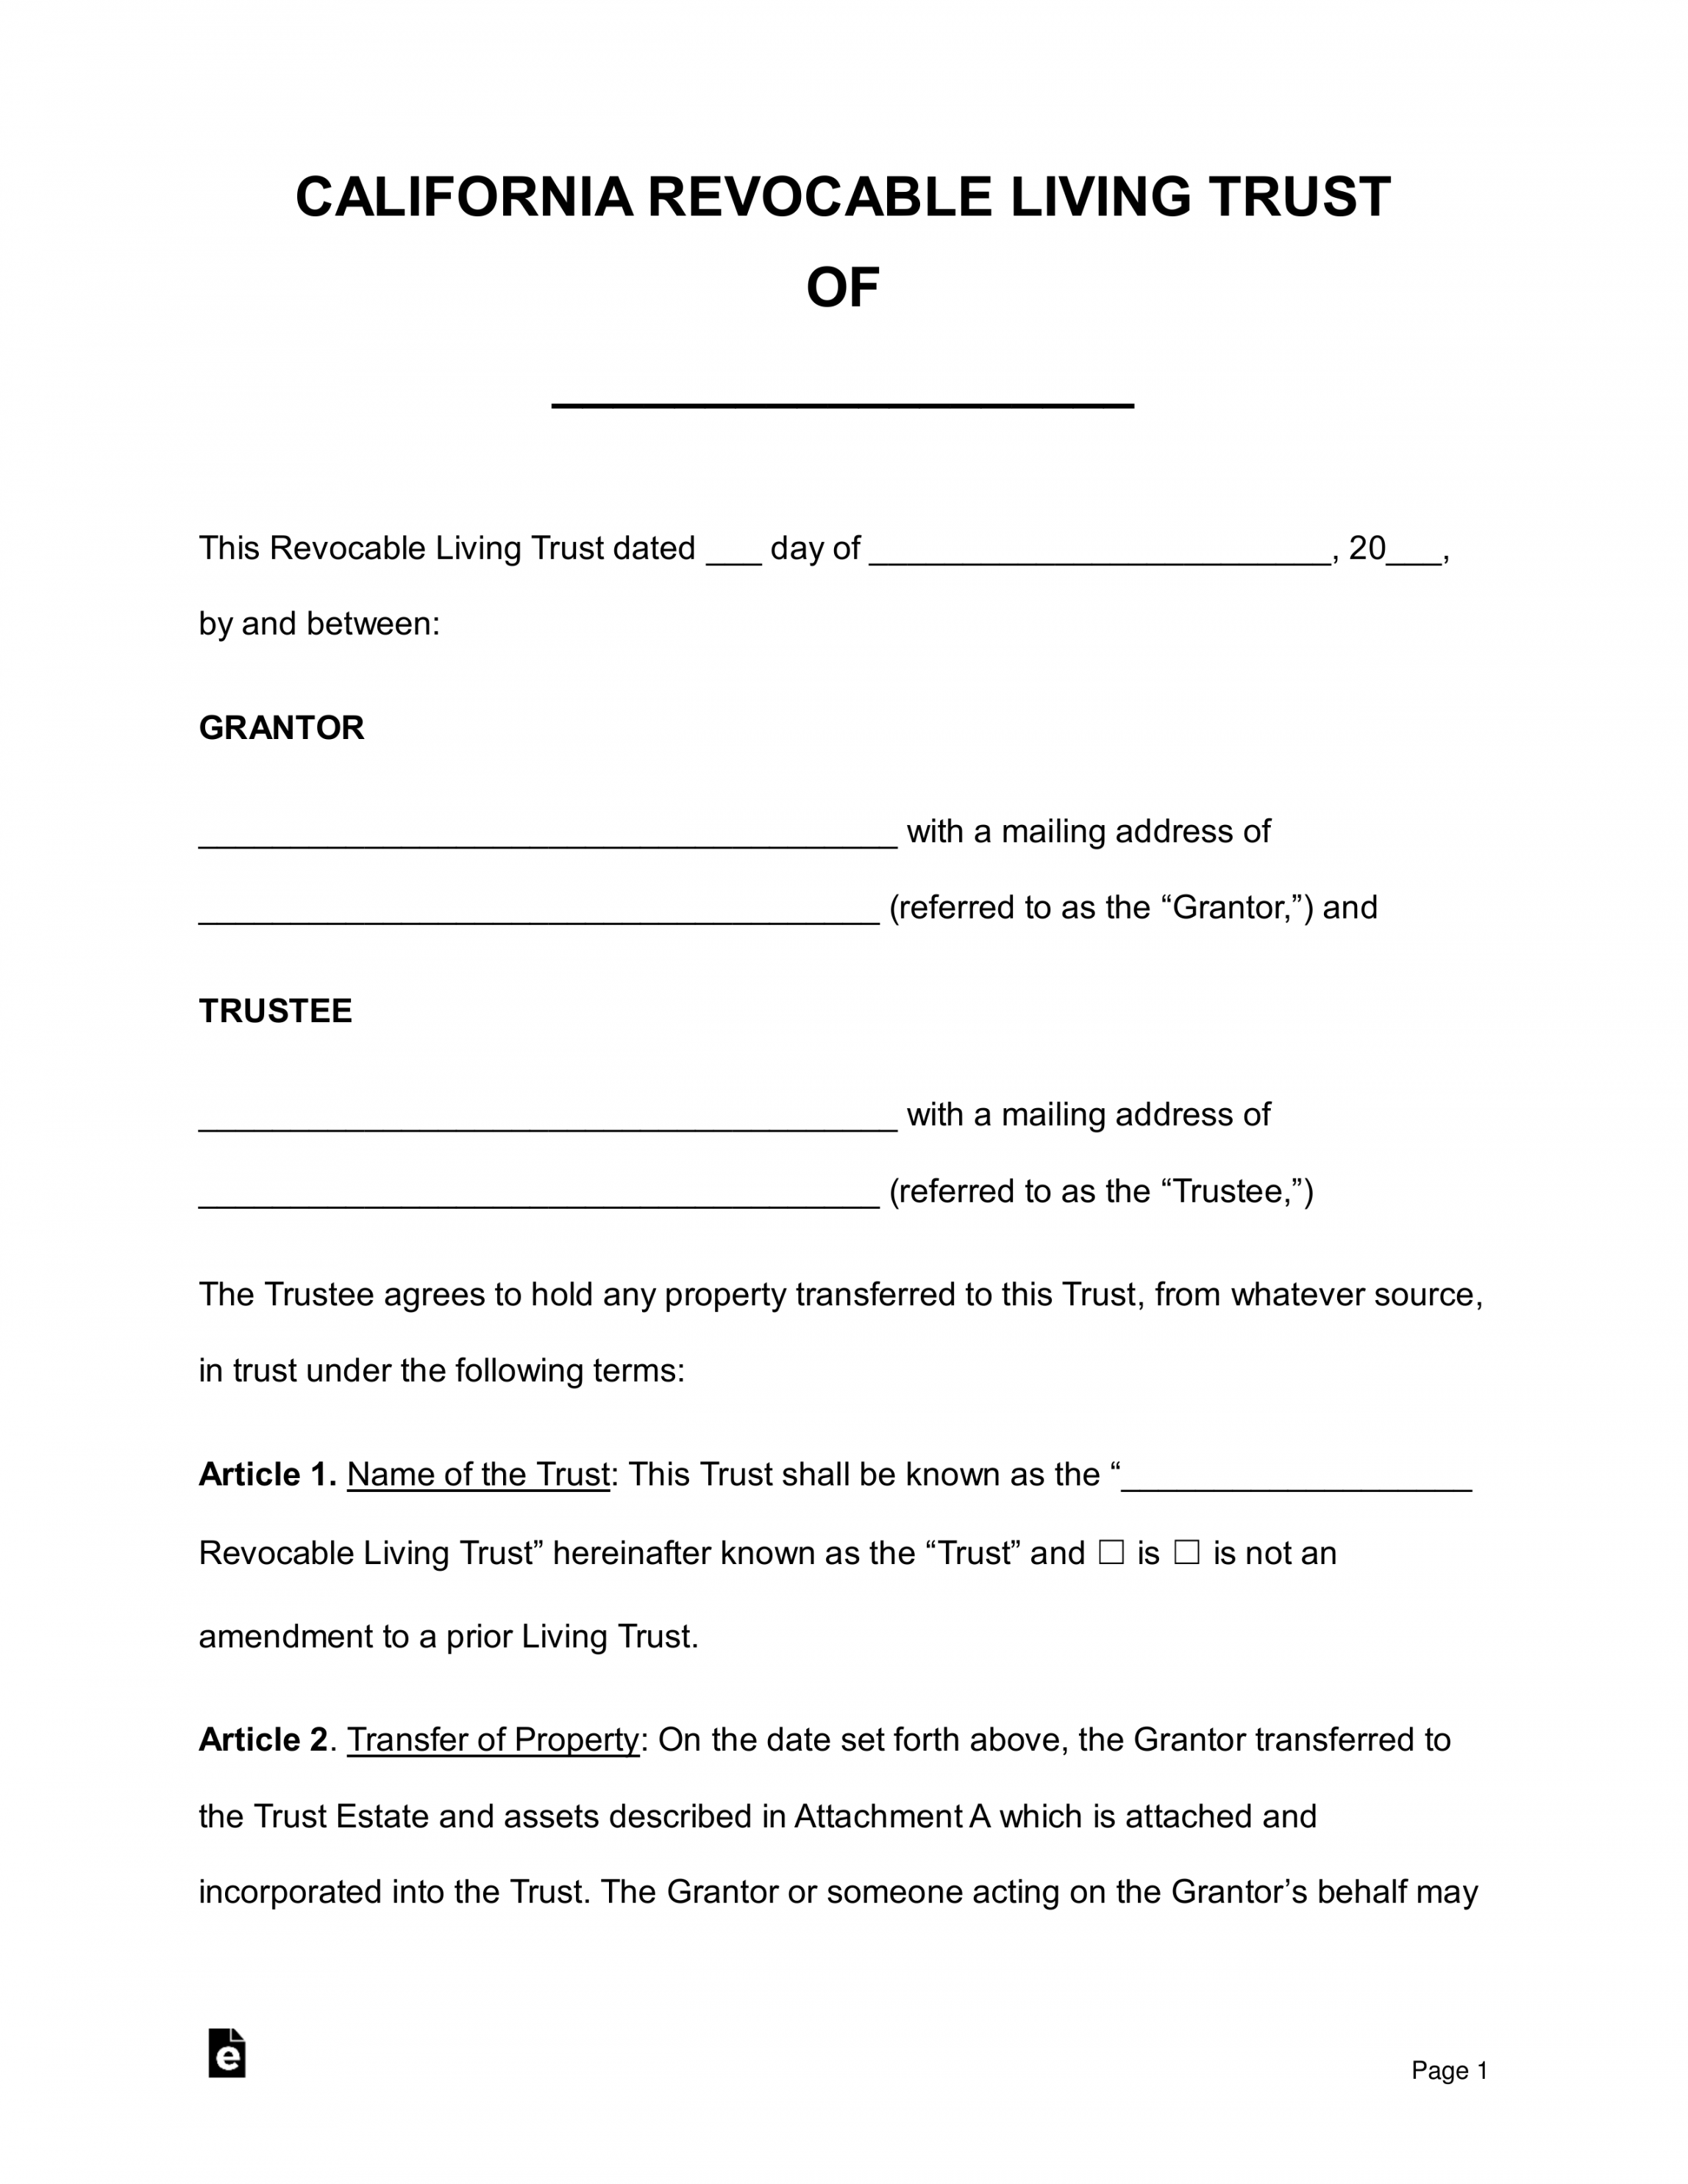 Free California Revocable Living Trust Form - PDF  Word – eForms - FREE Printables - Free Printable Trust Forms